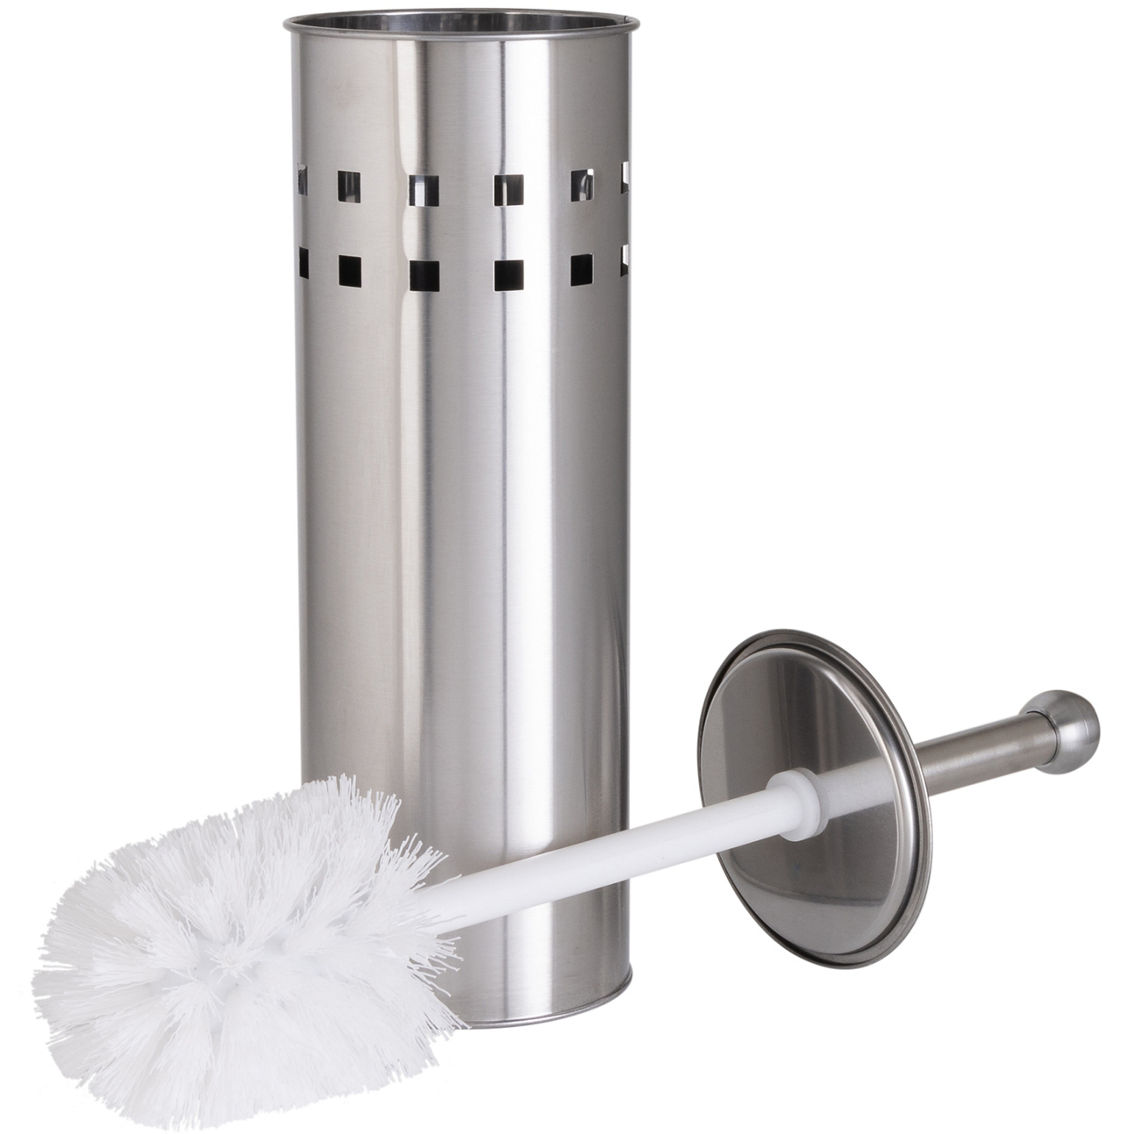 Bath Bliss Stainless Steel Toilet Brush and Air Vent Holder Set - Image 3 of 5